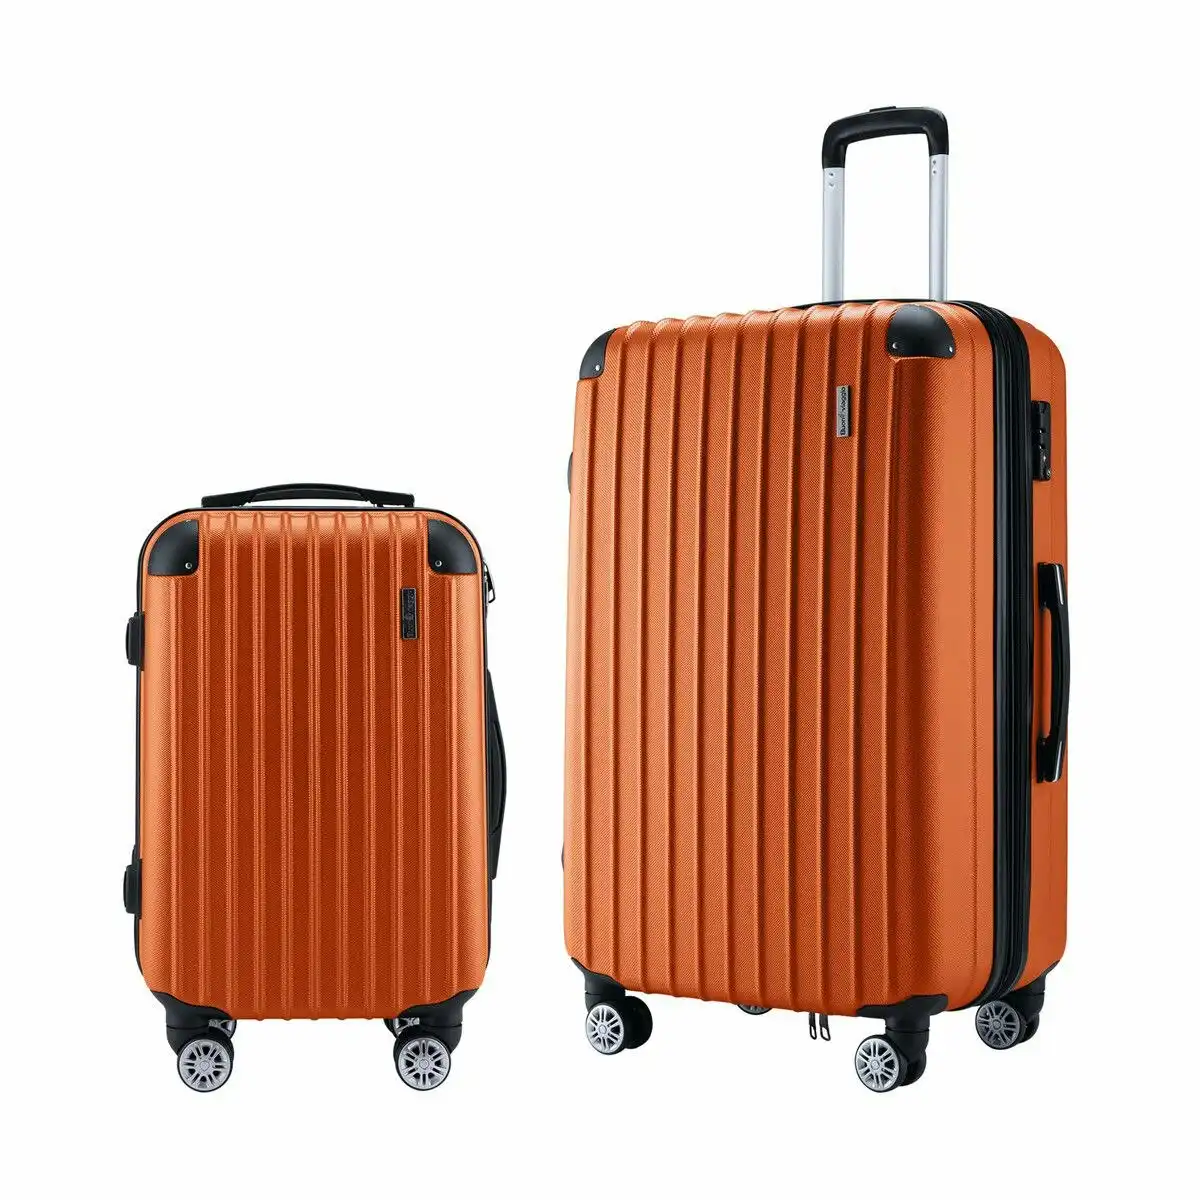 Buon Viaggio 2 Piece Luggage Set Carry On Suitcases Travel Case Cabin Hard Shell Travelling Bags Hand Baggage Lightweight Rolling TSA Lock Orange